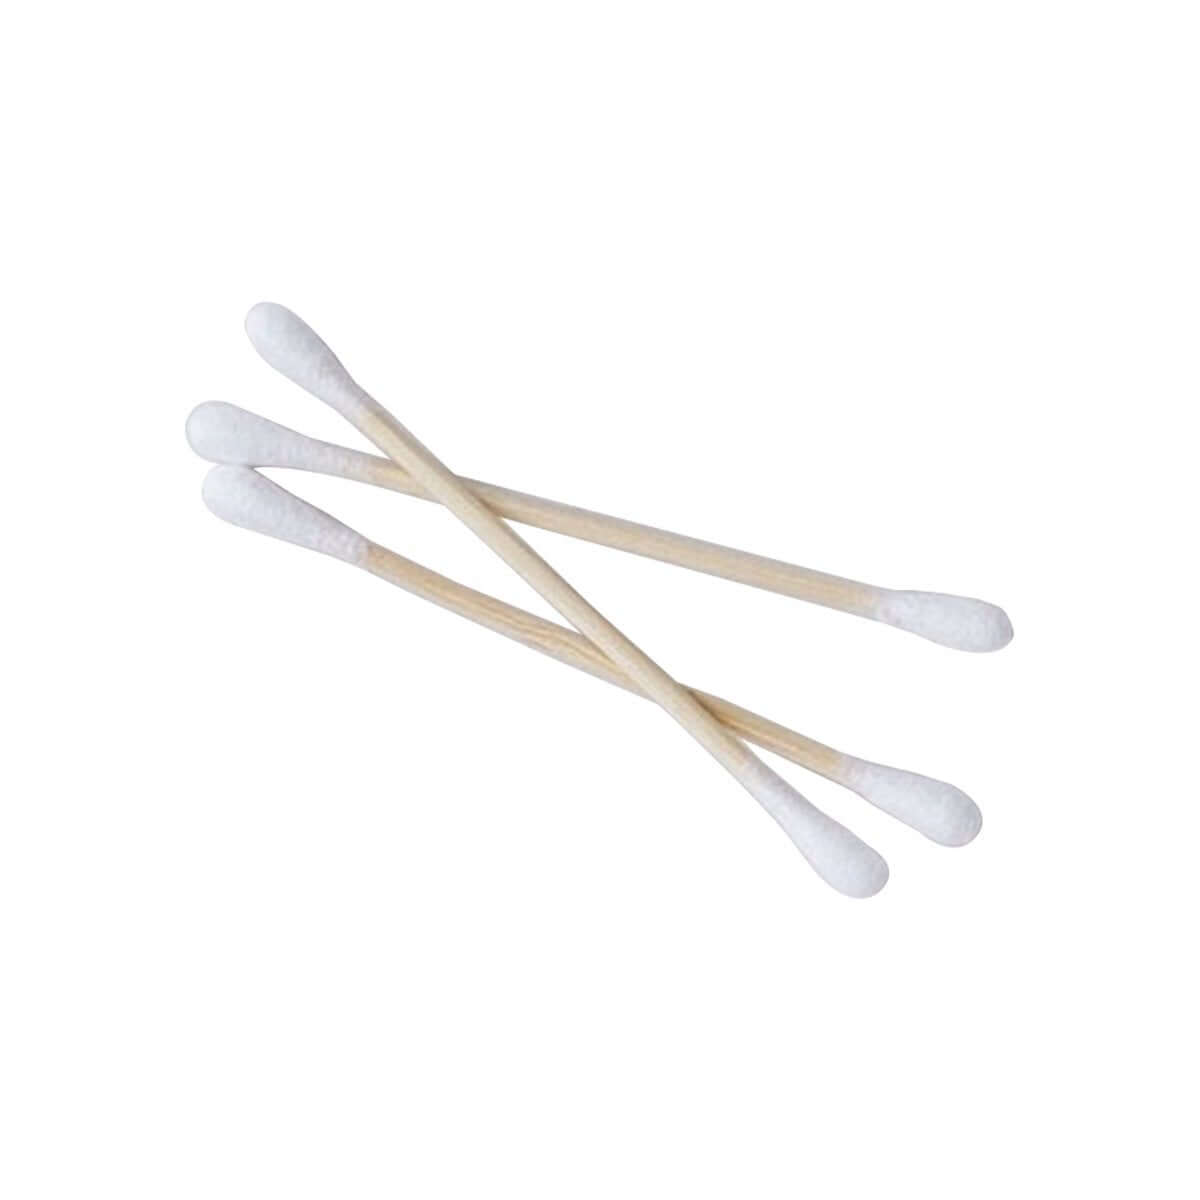 Brush it on organic cotton bamboo cotton buds. Plastic free and home compostable.